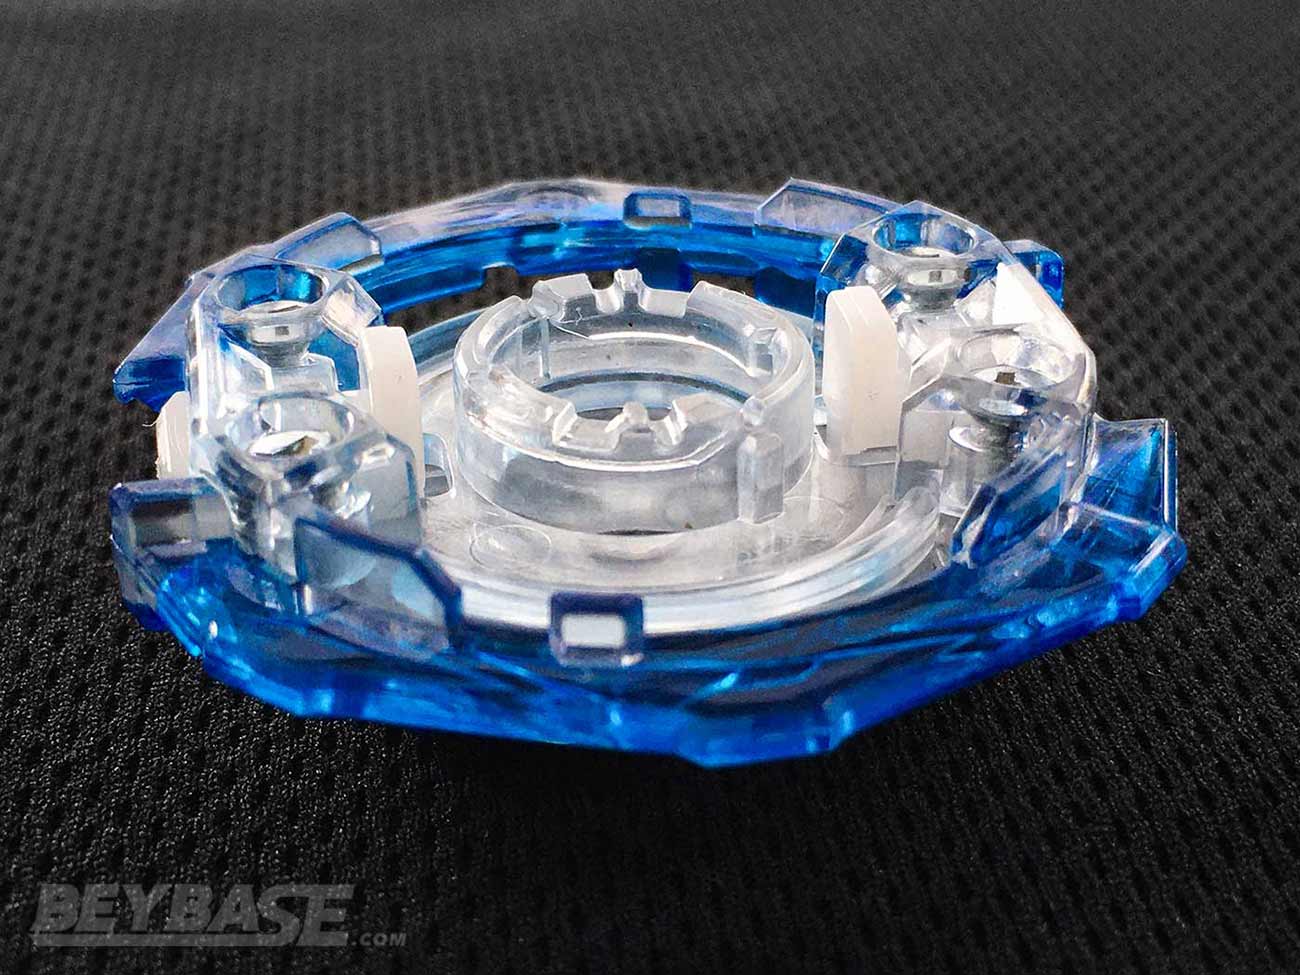 Usher In 'Beyblade Burst' Season 5 with New Hasbro Toys - The Toy